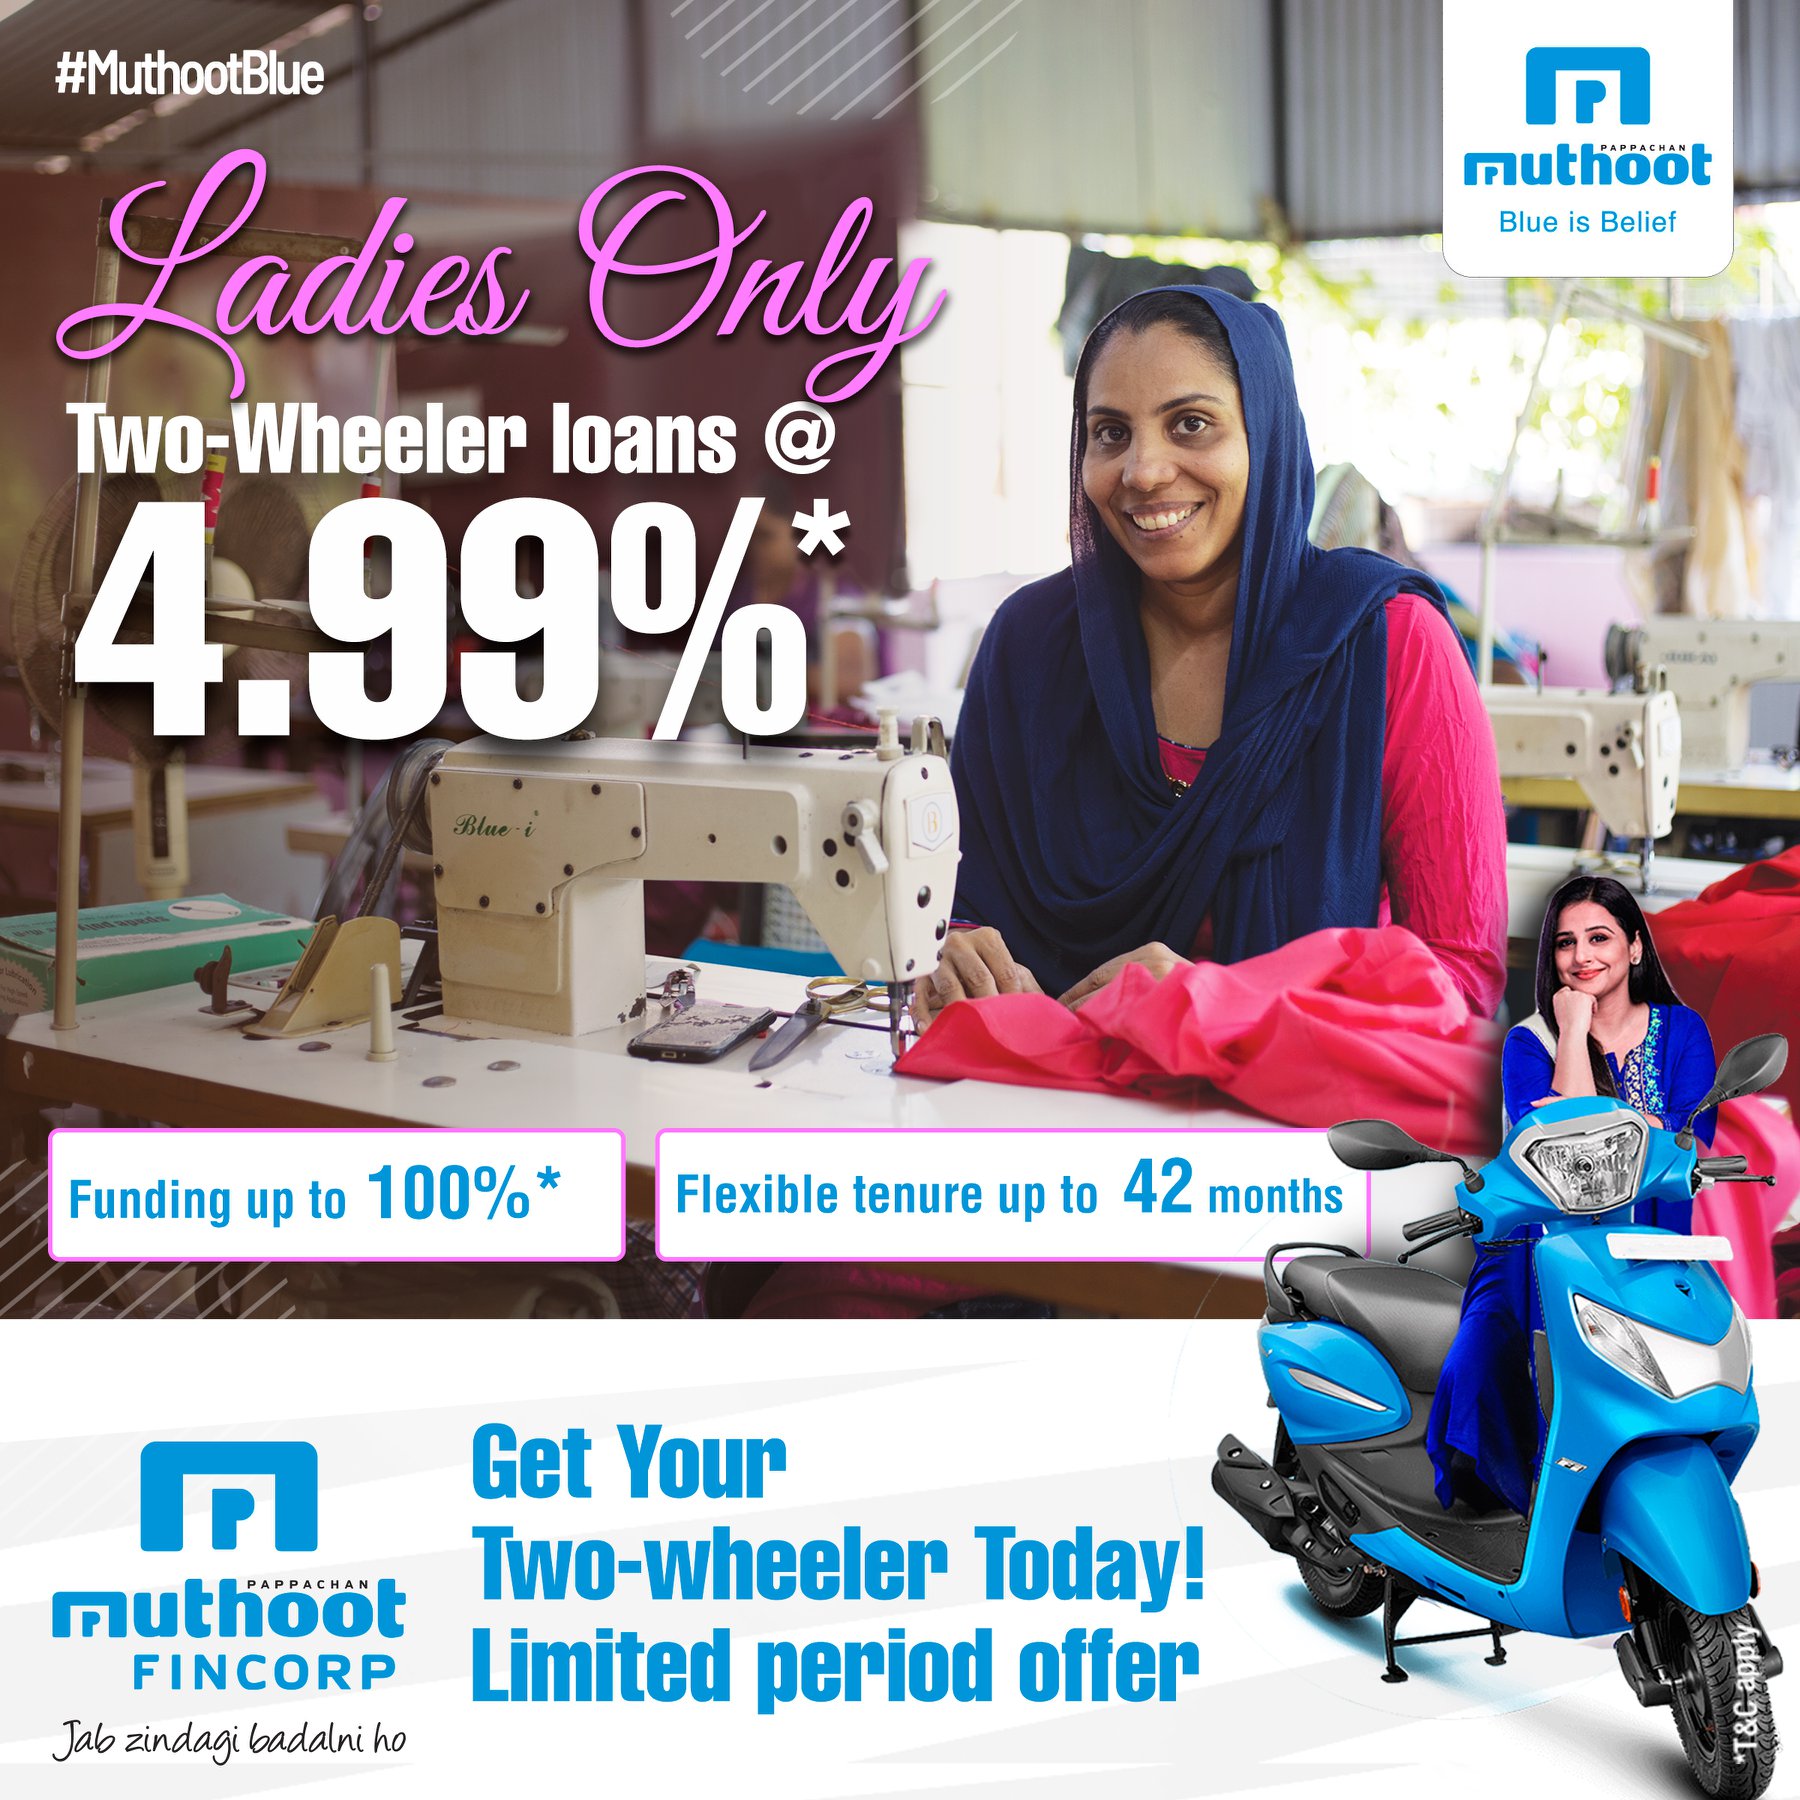 Muthoot Fincorp Gold Loan Services in Medchal, Hyderabad, Telangana